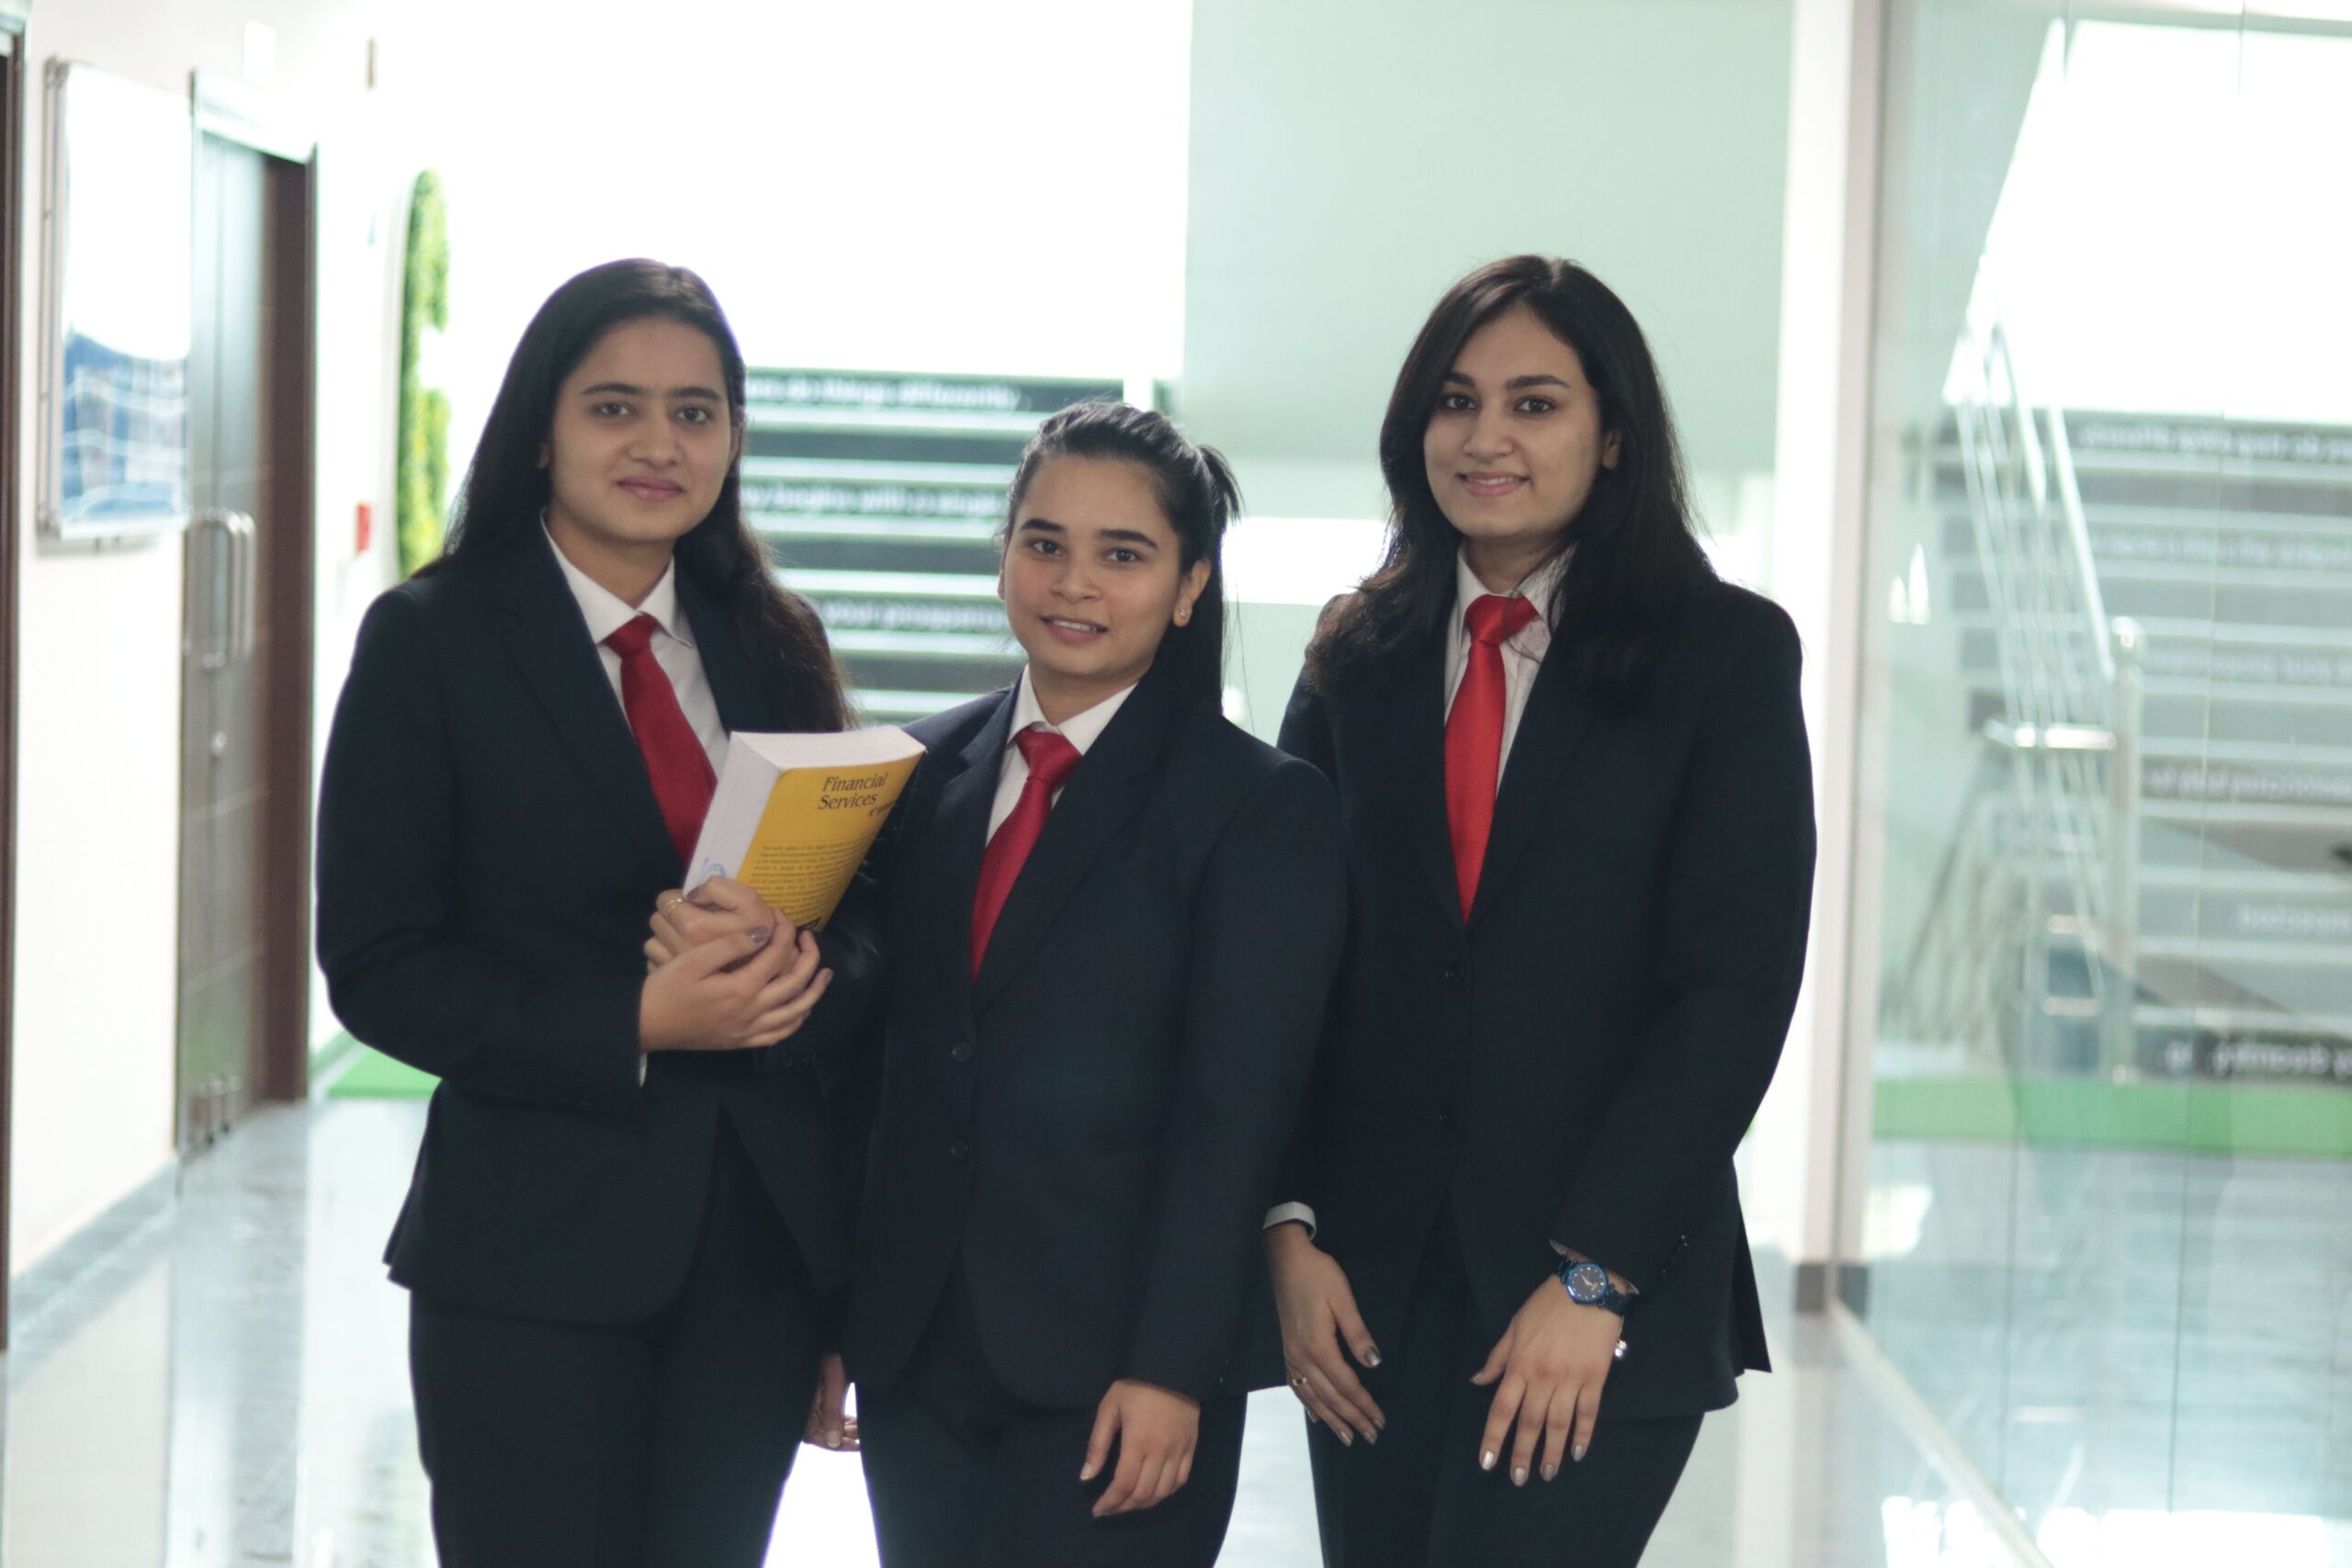 Students at Pml sd business school